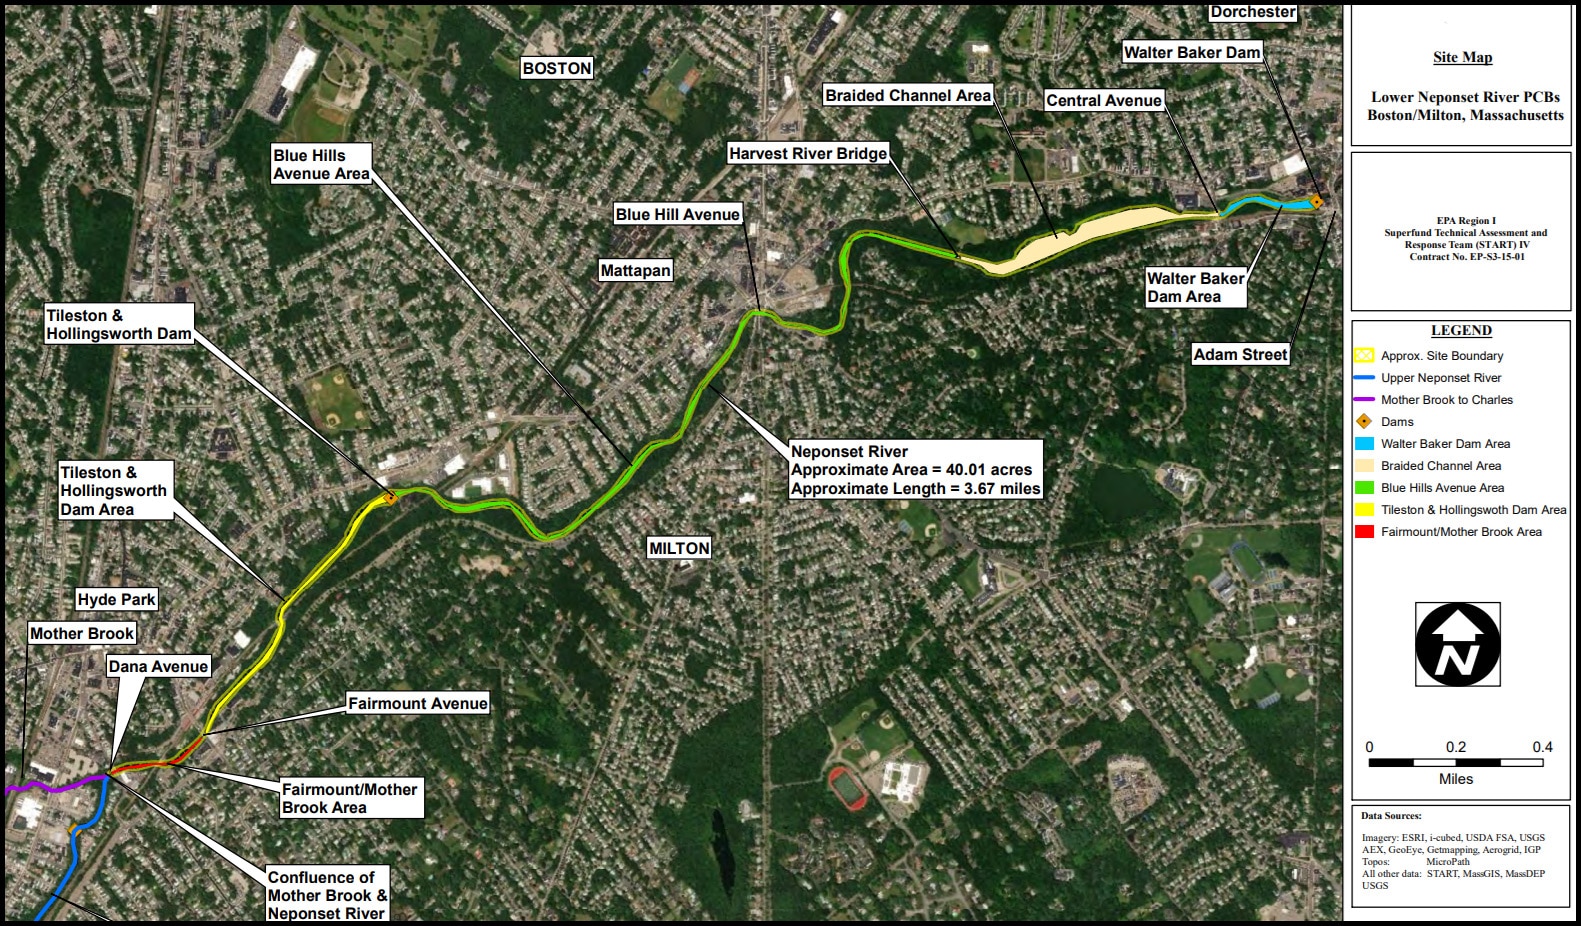 Map of the Lower Neponset River Site